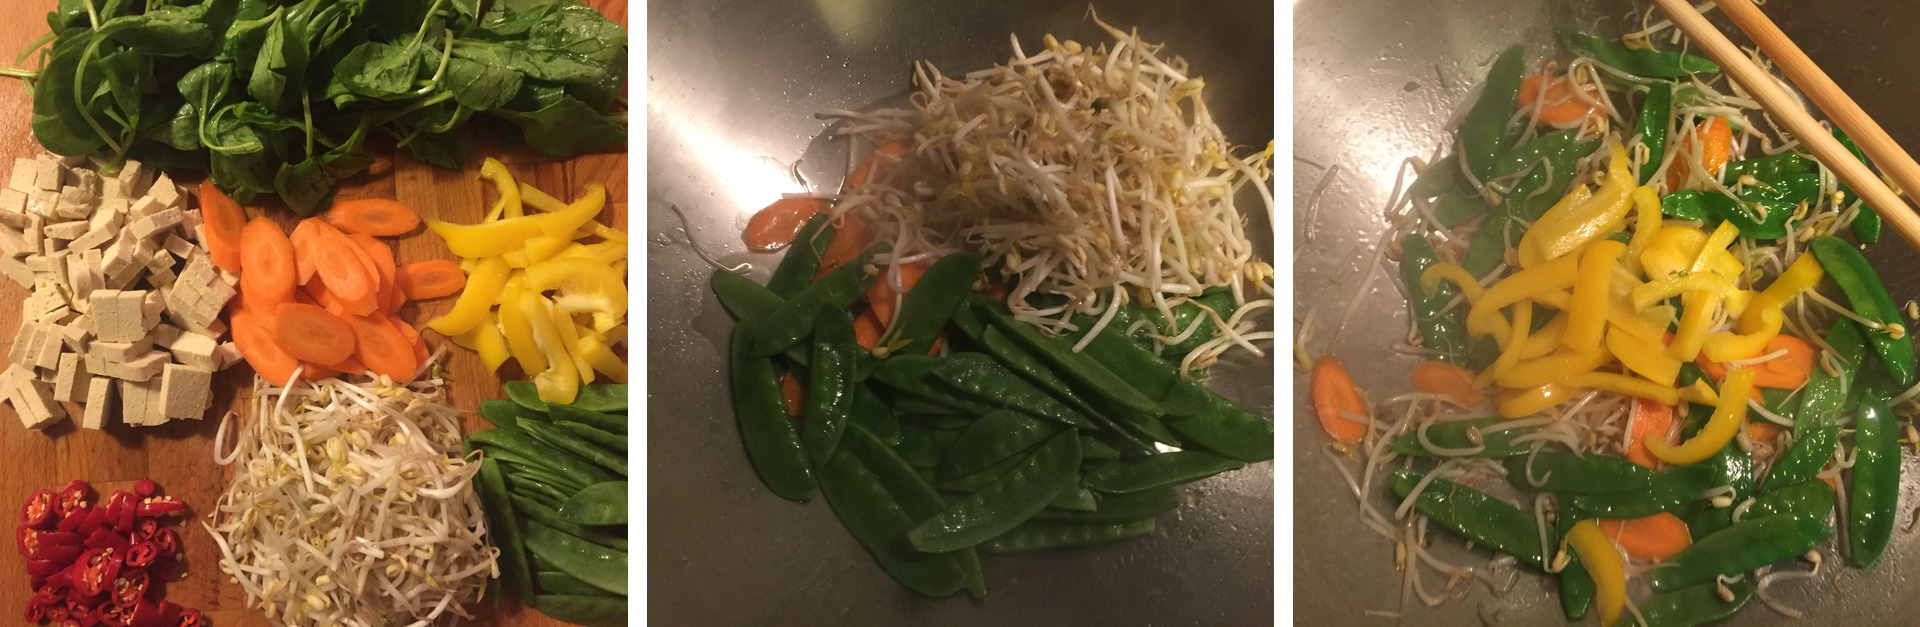 Mise-en-place and stir-frying the vegetables